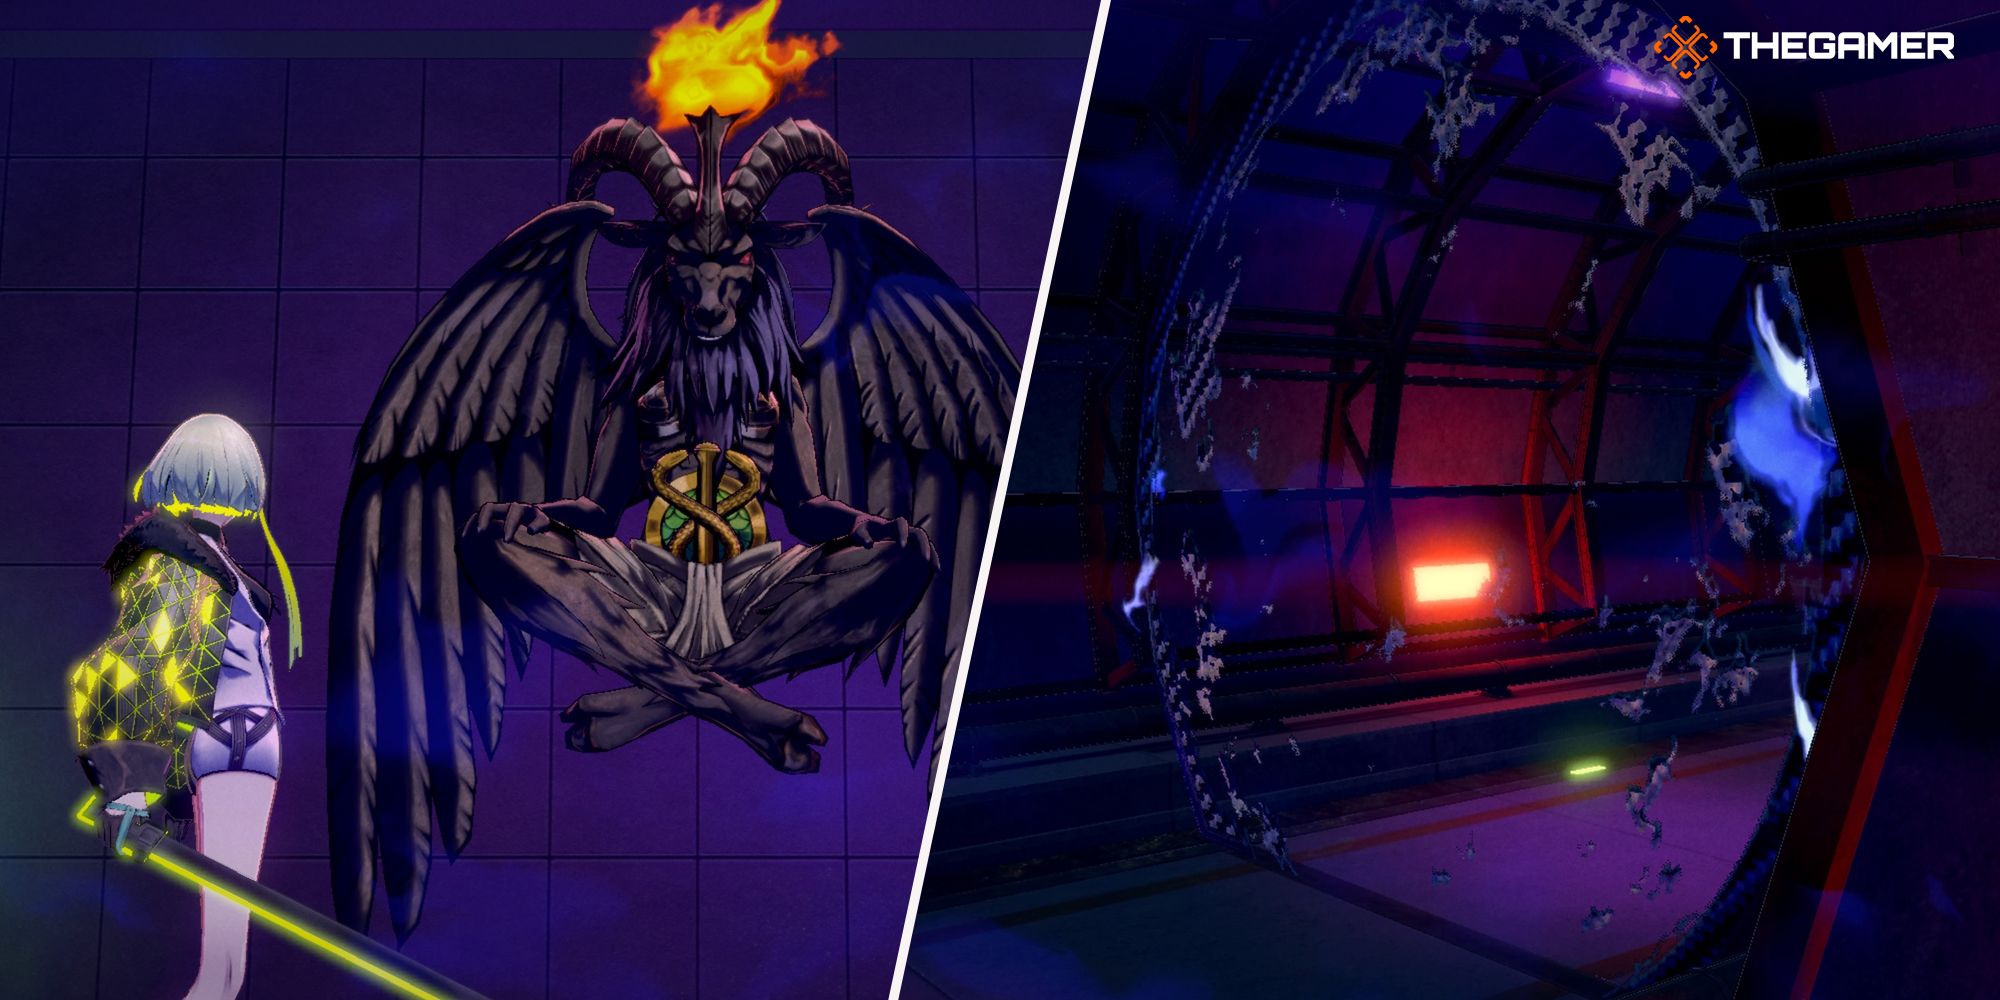 Soul Hackers 2 split image of Ringo and the goat headed demon and a broken barrier